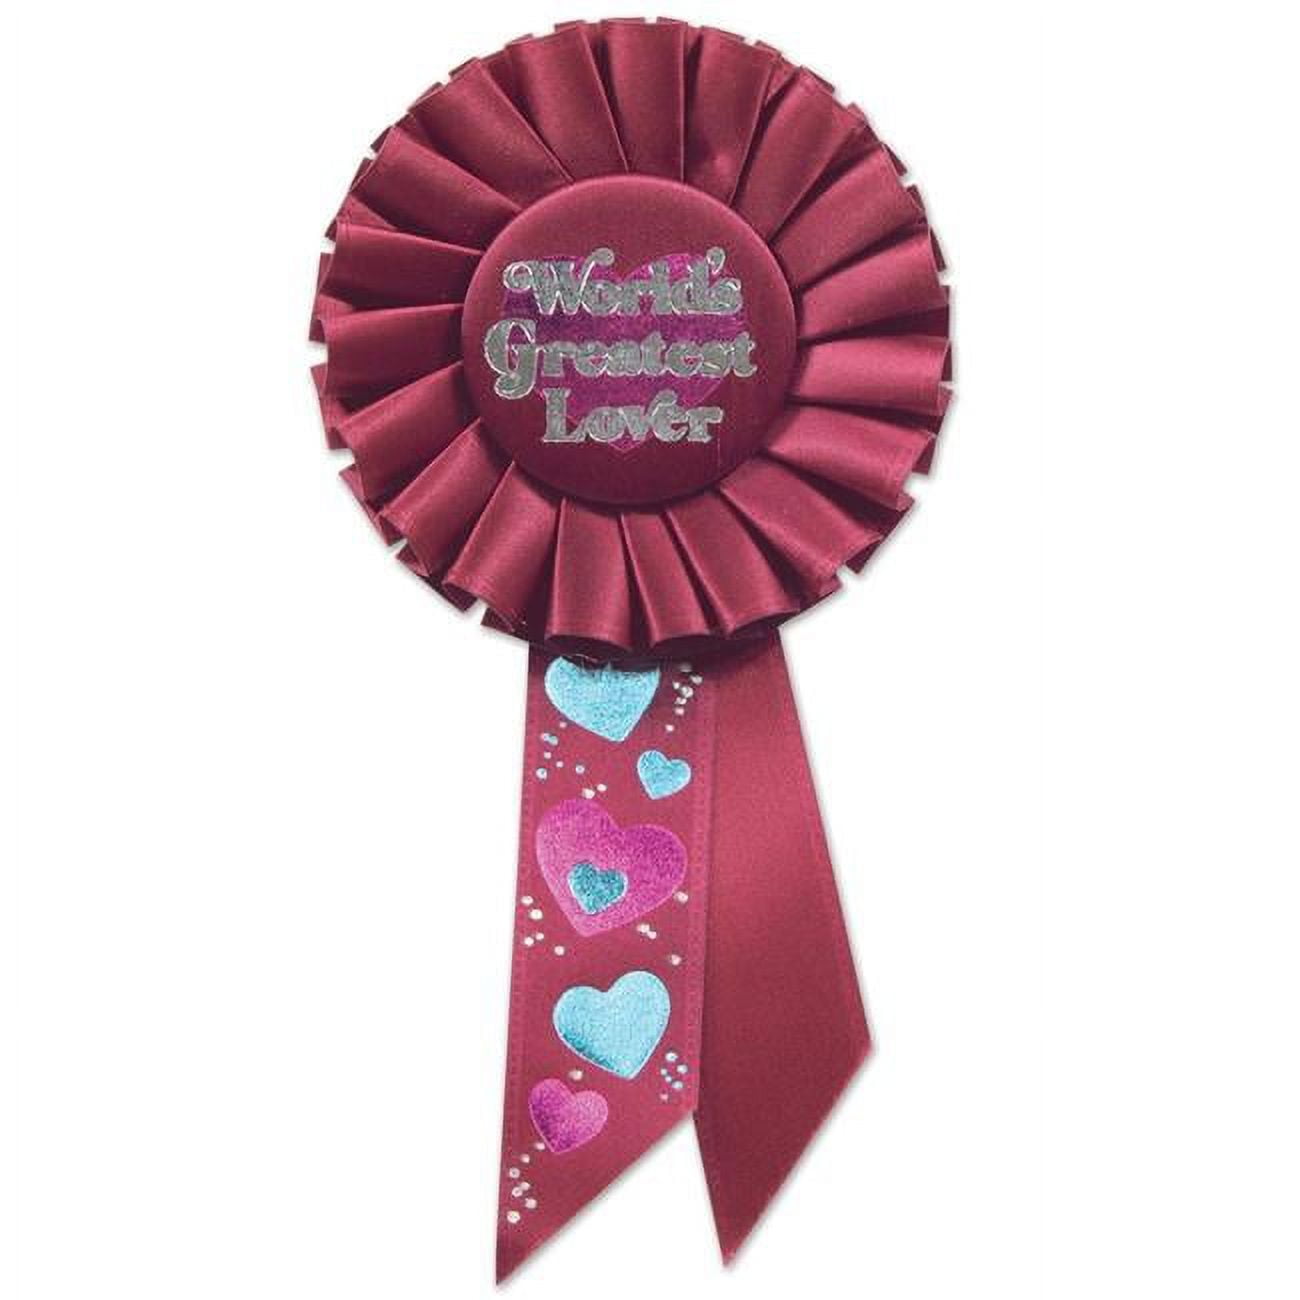 Picture of Beistle RS060 3.25 x 6.5 in. World Greatest Lover Rosette